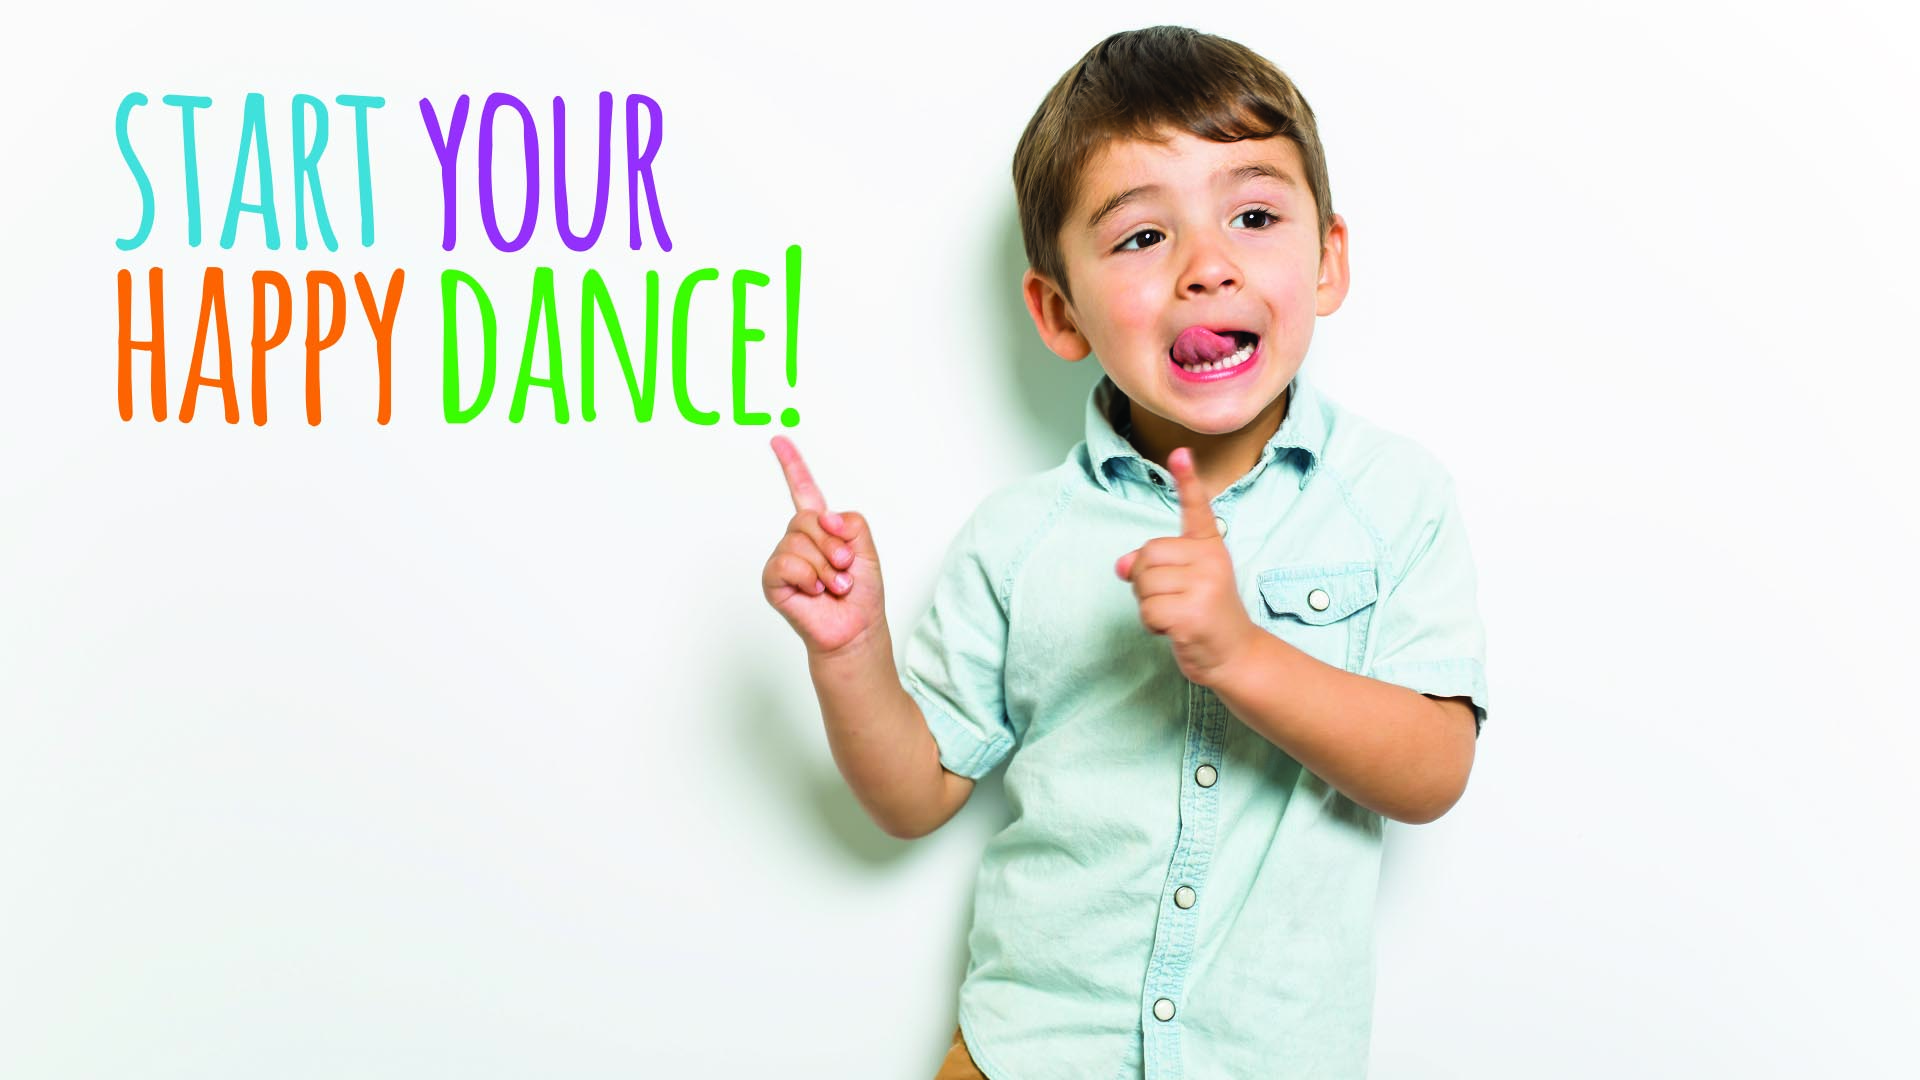 Start Your Happy Dance with image of little boy dancing